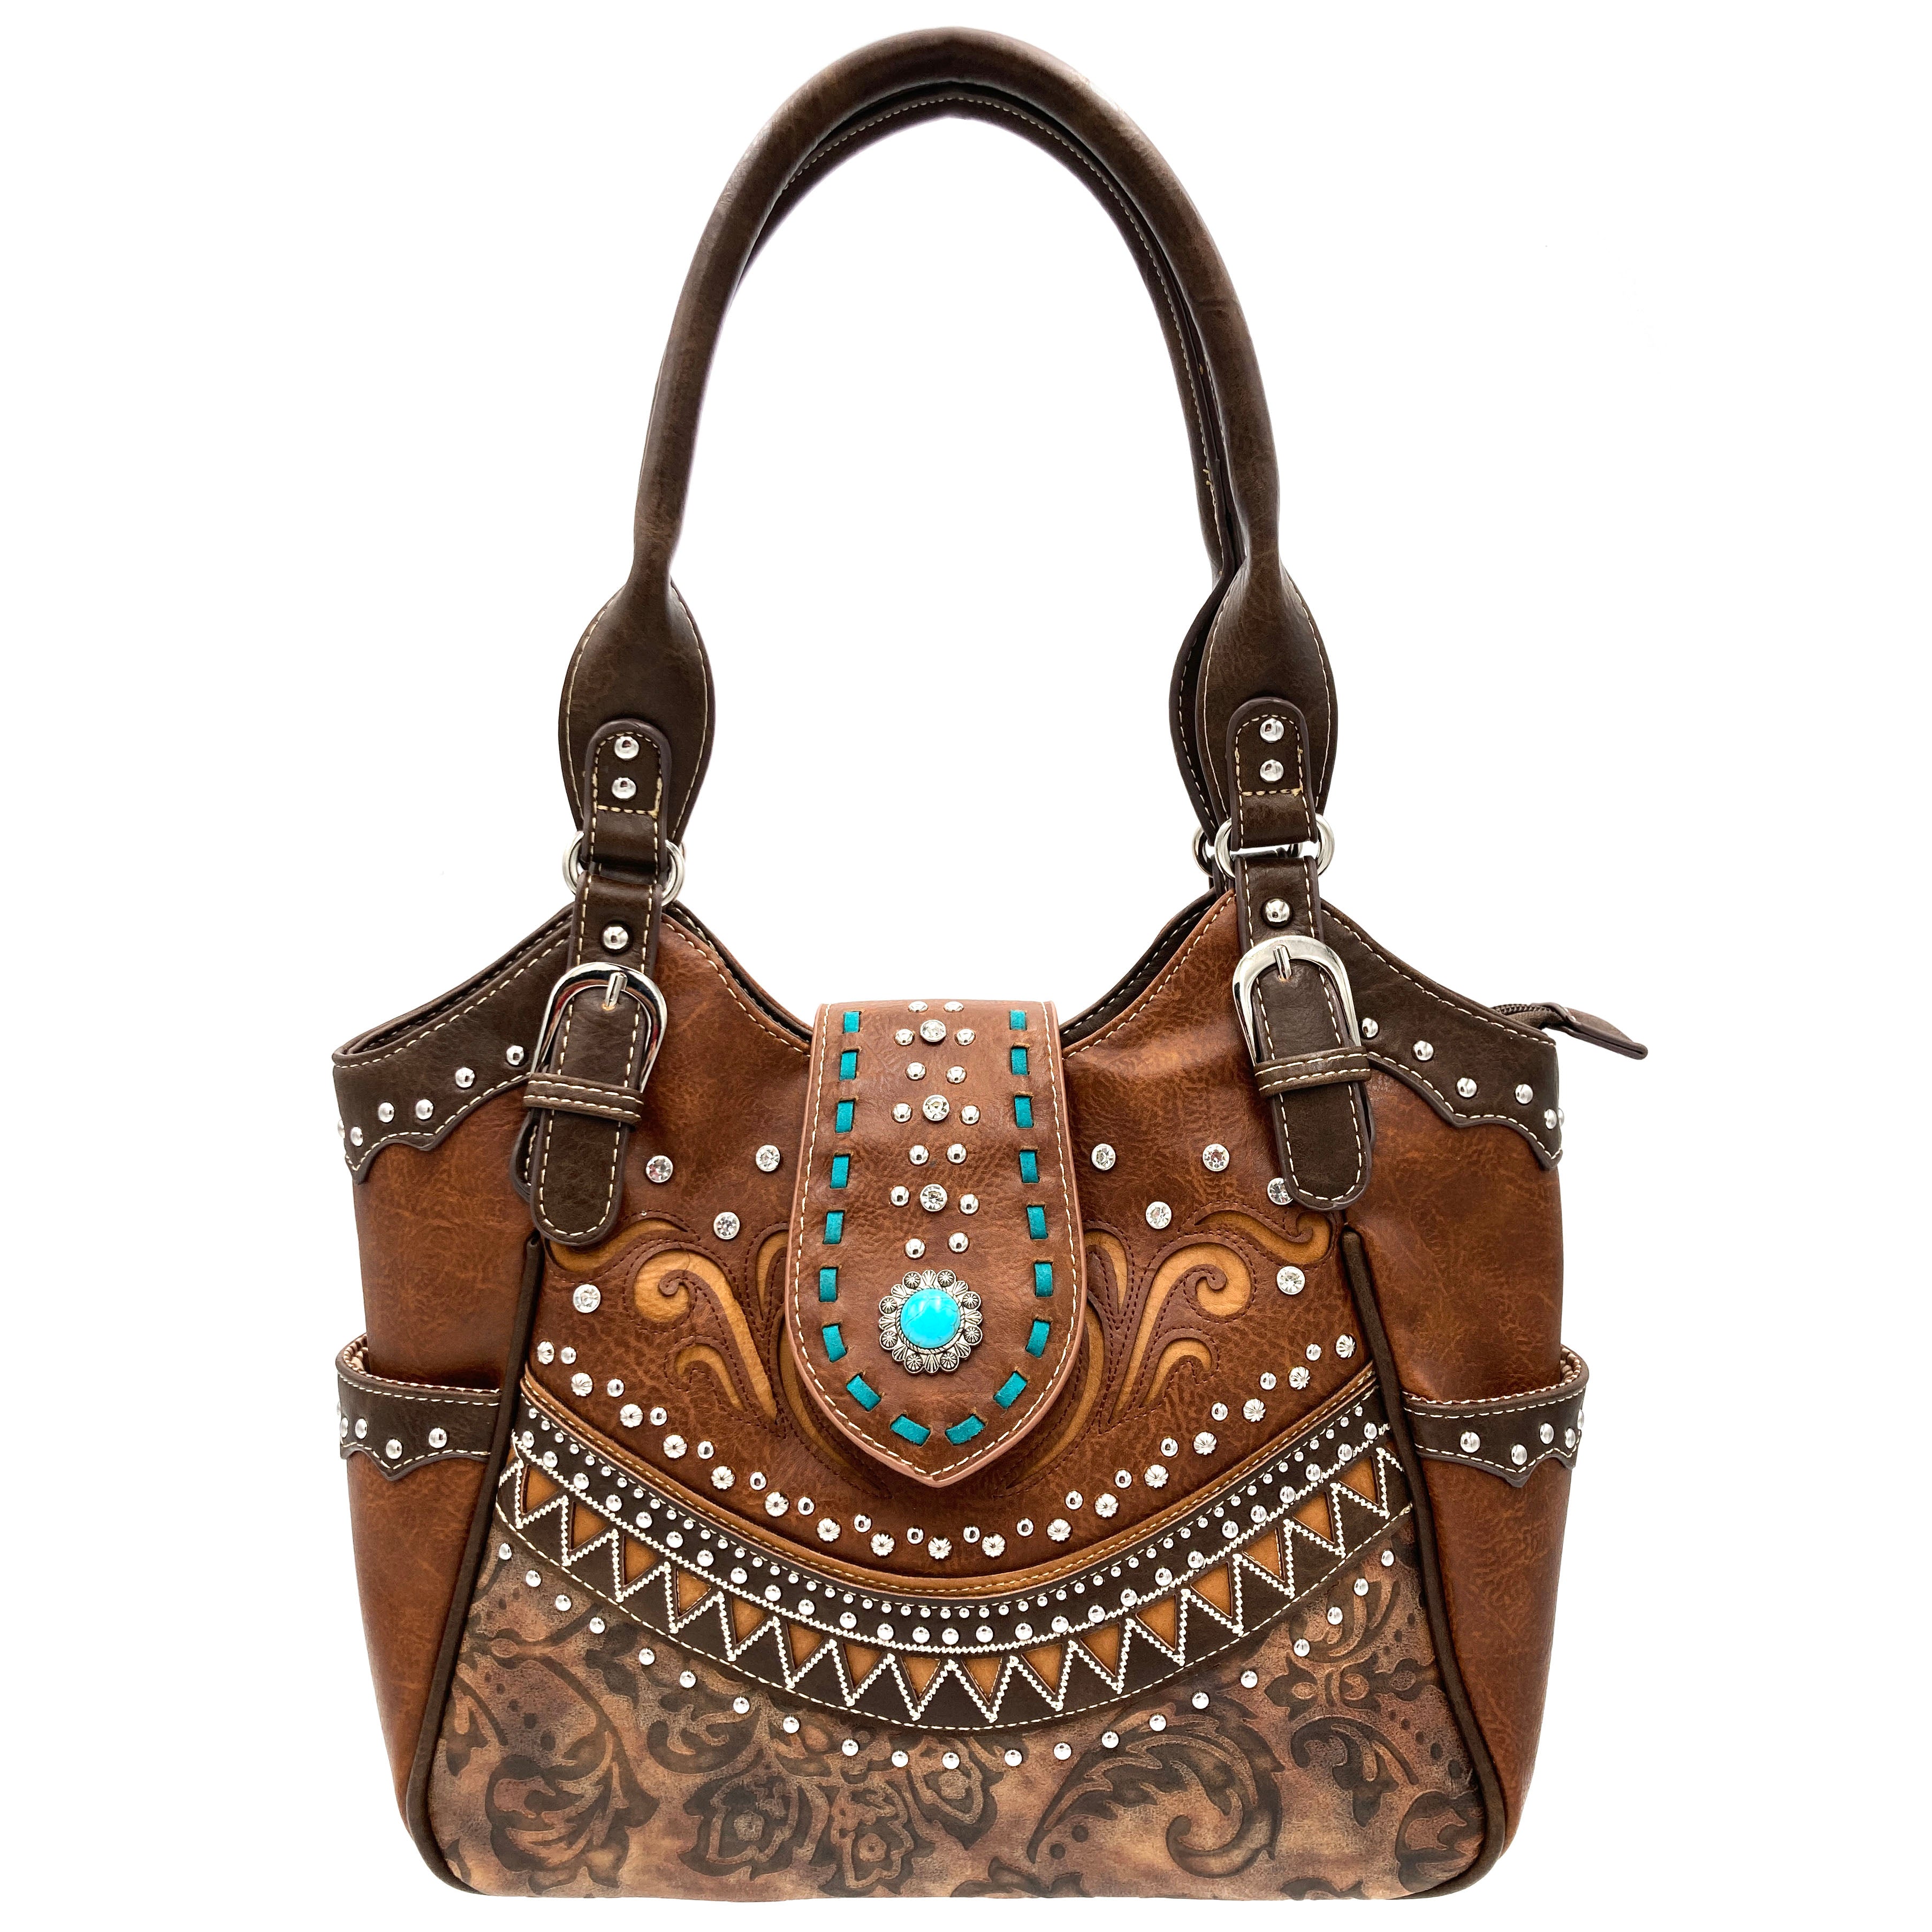 Buy WESTERN ORIGIN Tooled Leather Laser Cut Concealed Carry Purses Feather  Country Western Handbags Shoulder Bags Wallet Set (Coffee 2) at Amazon.in